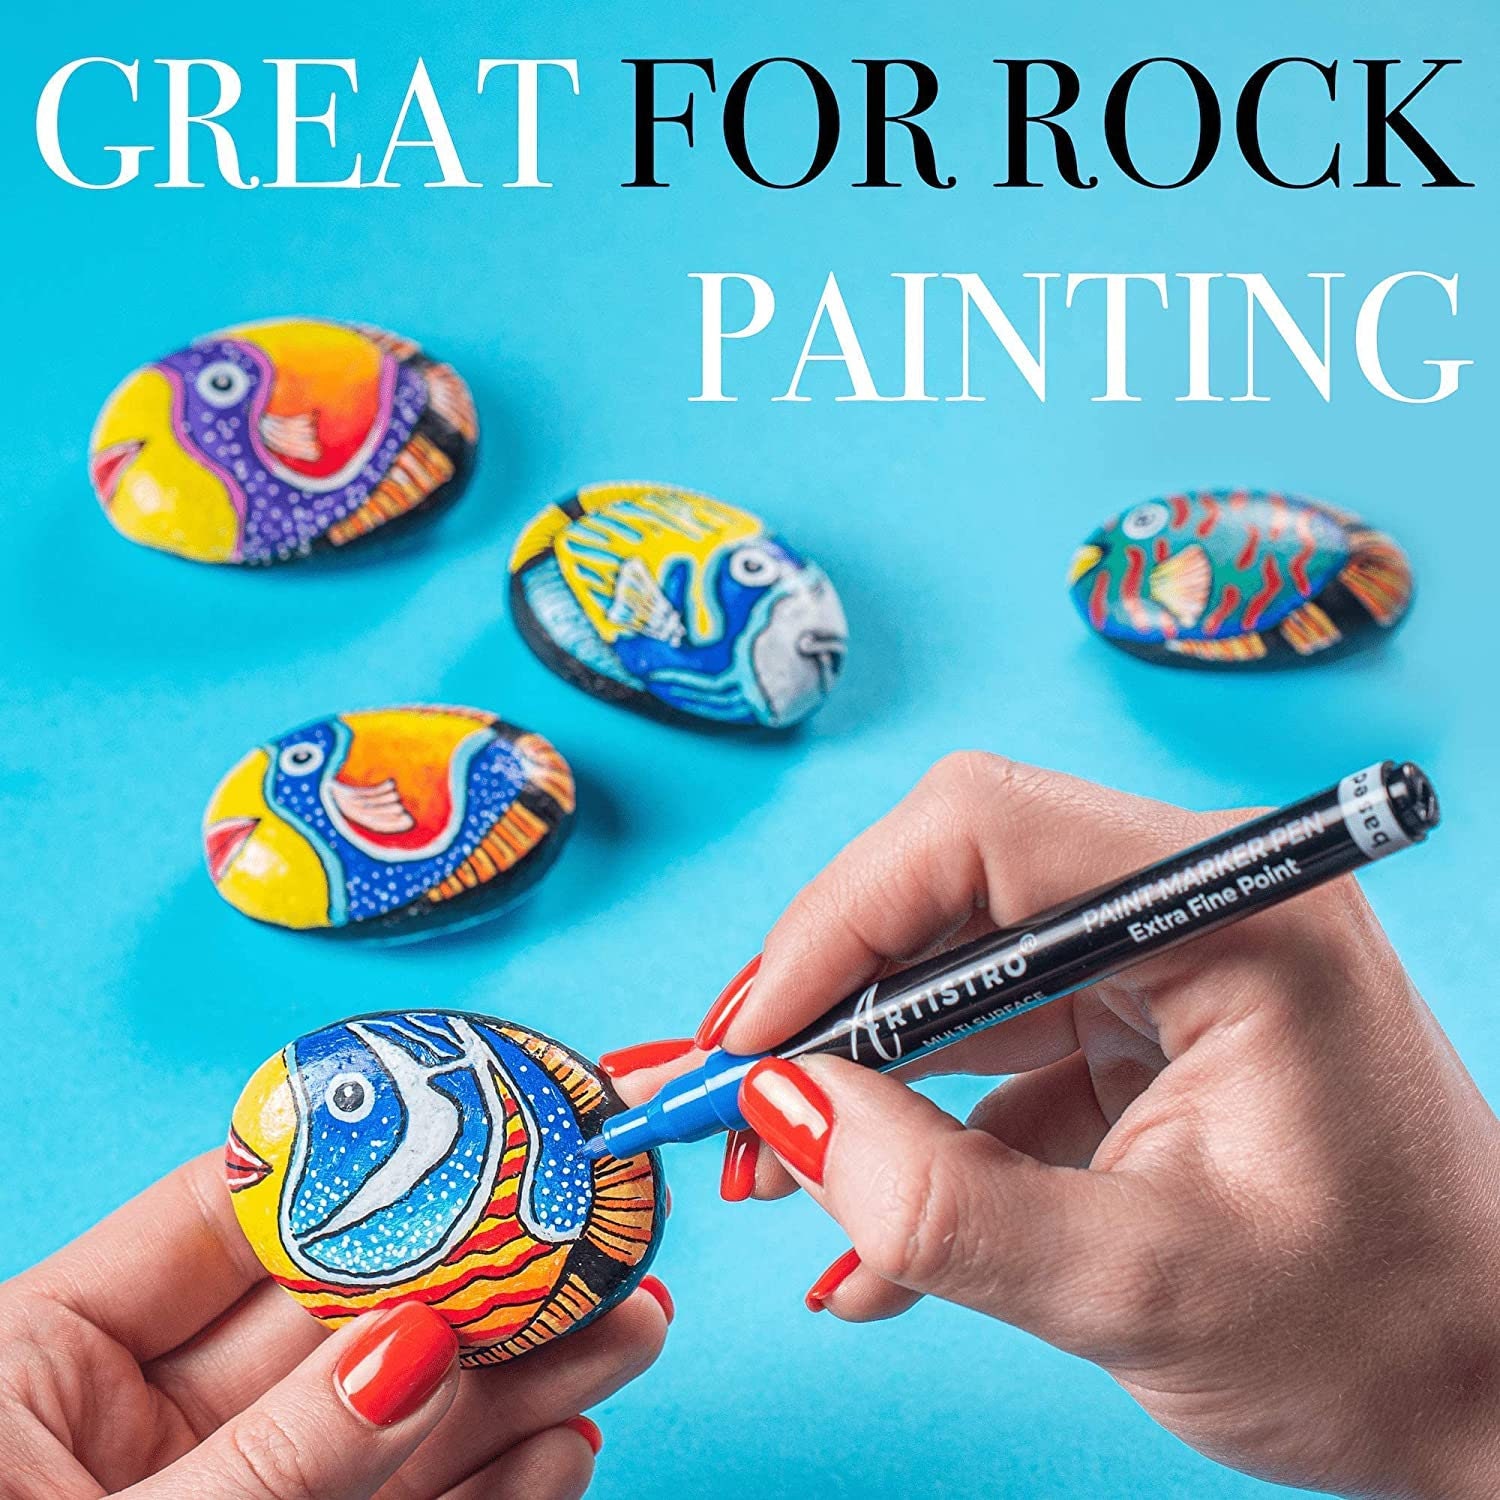 50 Artistro Cute Paint Pens 30 Multicolor 5 White 5 Black Extra Fine  Acrylic Markers for Rock Painting, Family Painting, Kids Craft 